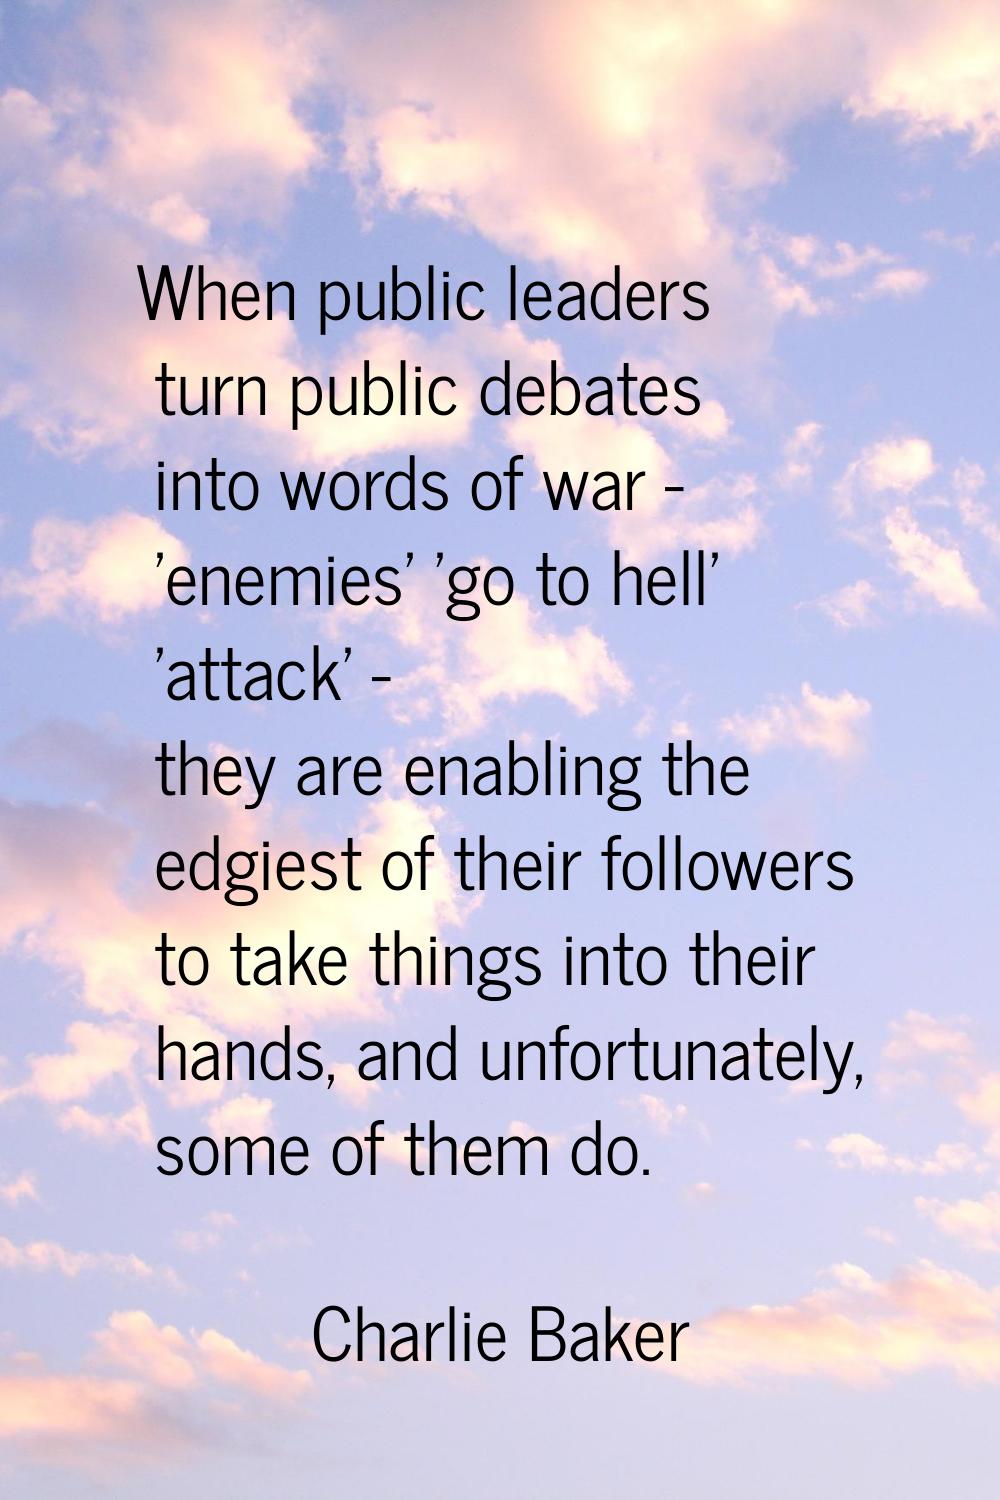 When public leaders turn public debates into words of war - 'enemies' 'go to hell' 'attack' - they 